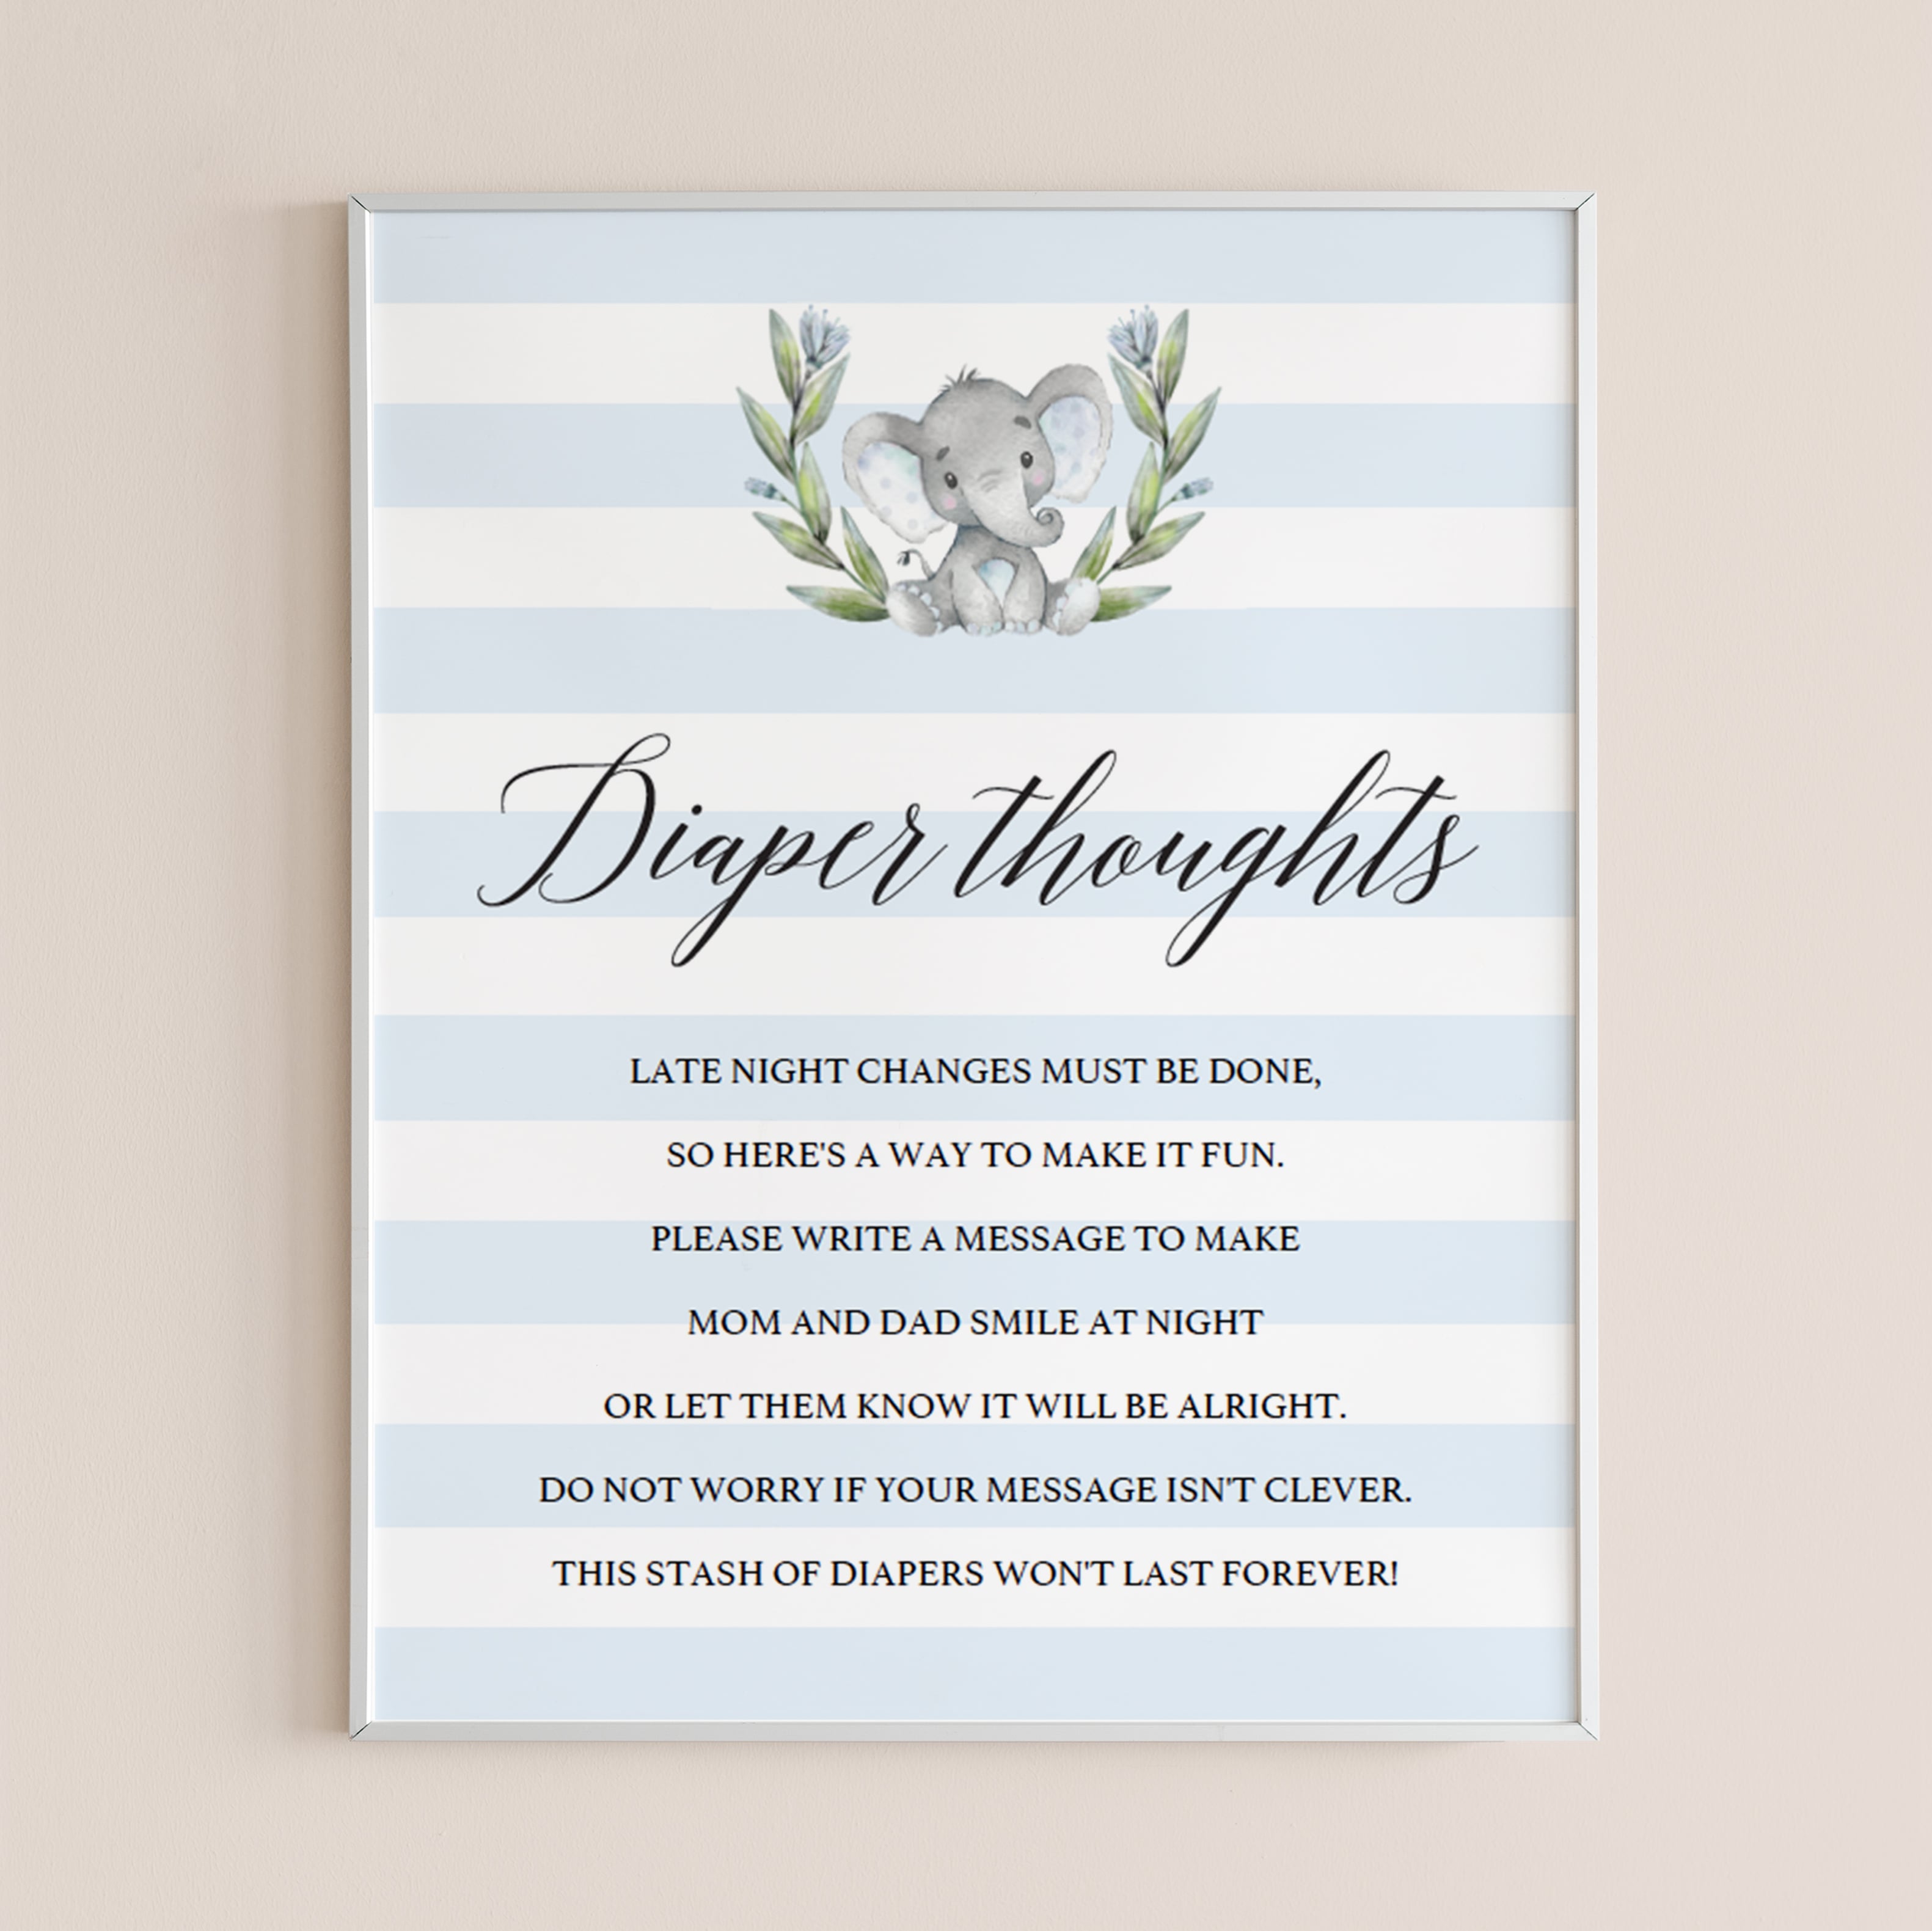 Printable elephant shower midnight diapers sign by LittleSizzle